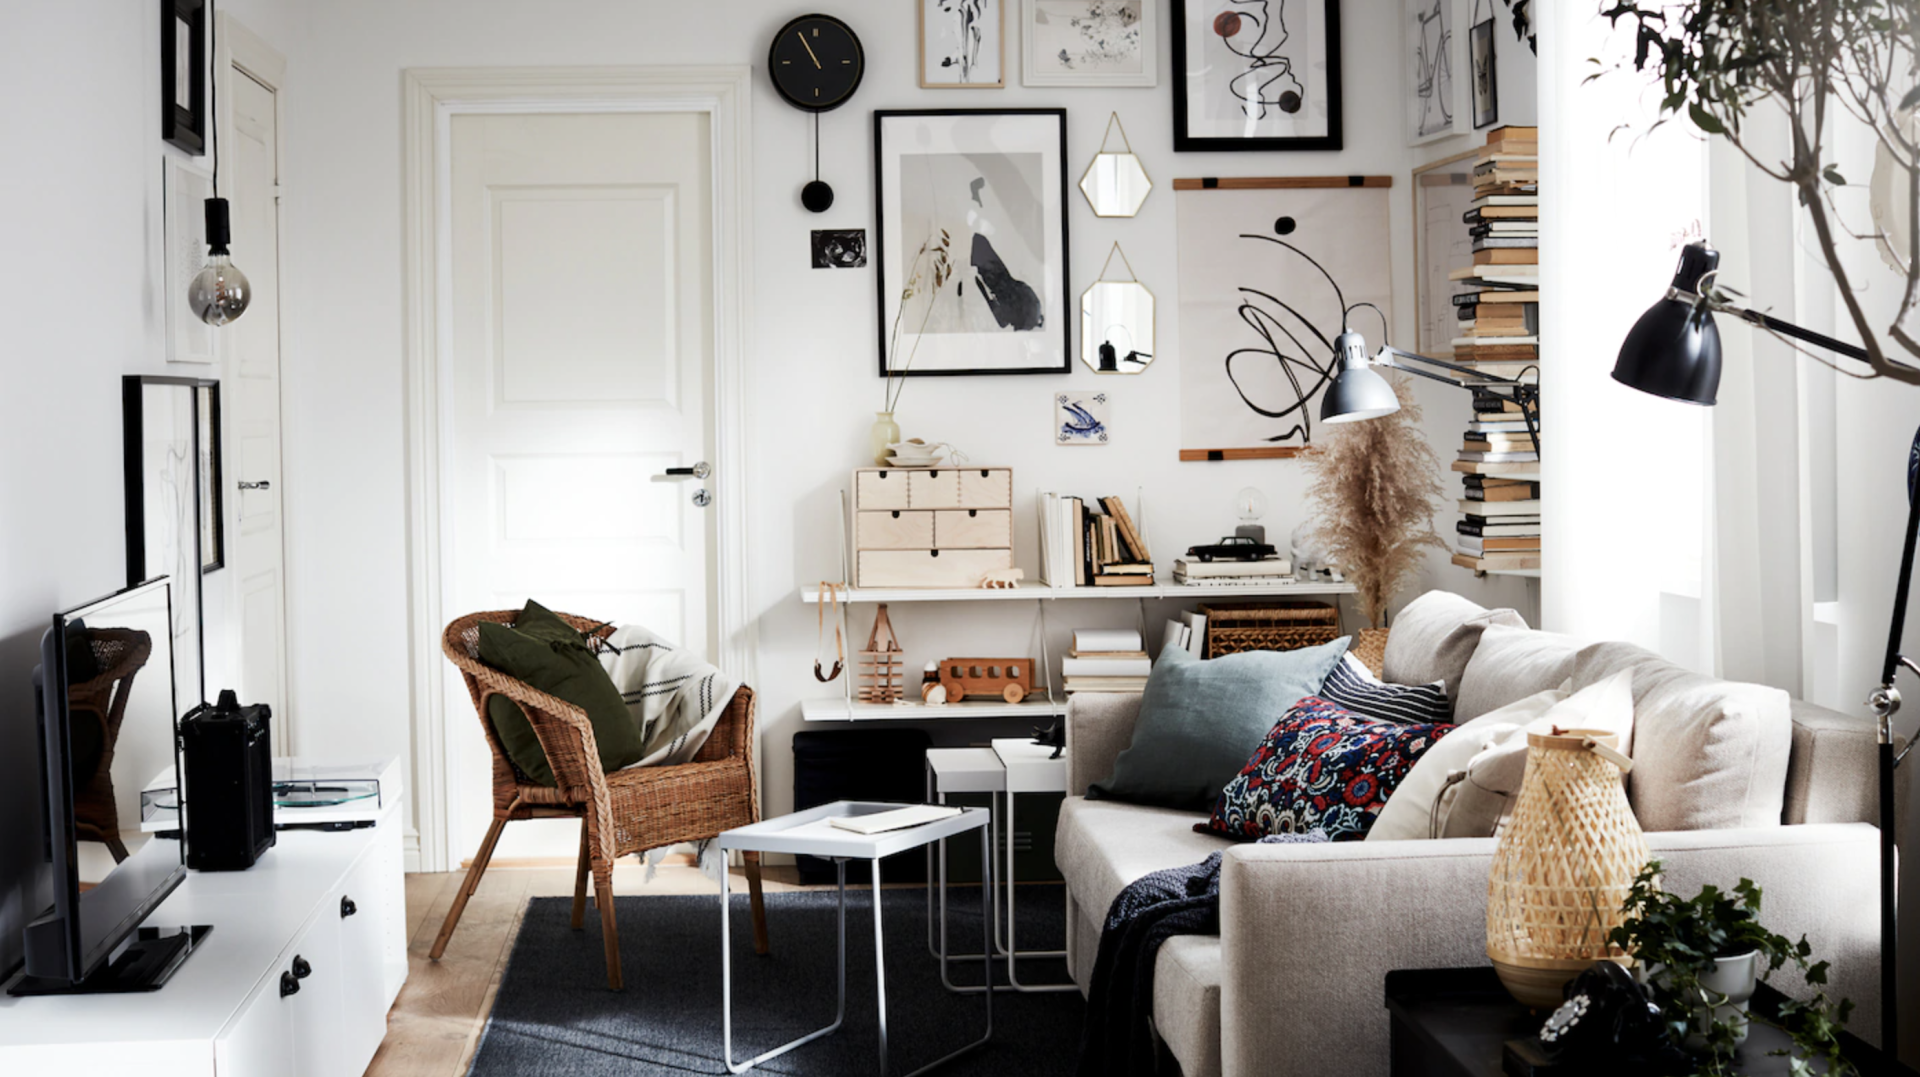 <p>                     Sometimes the best thing for a cramped apartment living room is to embrace those small dimensions. Turn a small sad room into a rustic, boho, bang-on-trend dream space just by filling it with plenty of different textiles and textures.                    </p>                                      <p>                     Pile up the throw pillows and blankets on the sofa, cover the walls with prints and memorabilia, stack up your books and fill every surface with decoration. Stop it looking too crazy by keeping the walls white so you have that neutral backdrop, and pick a simple color palette for your decor too.                   </p>